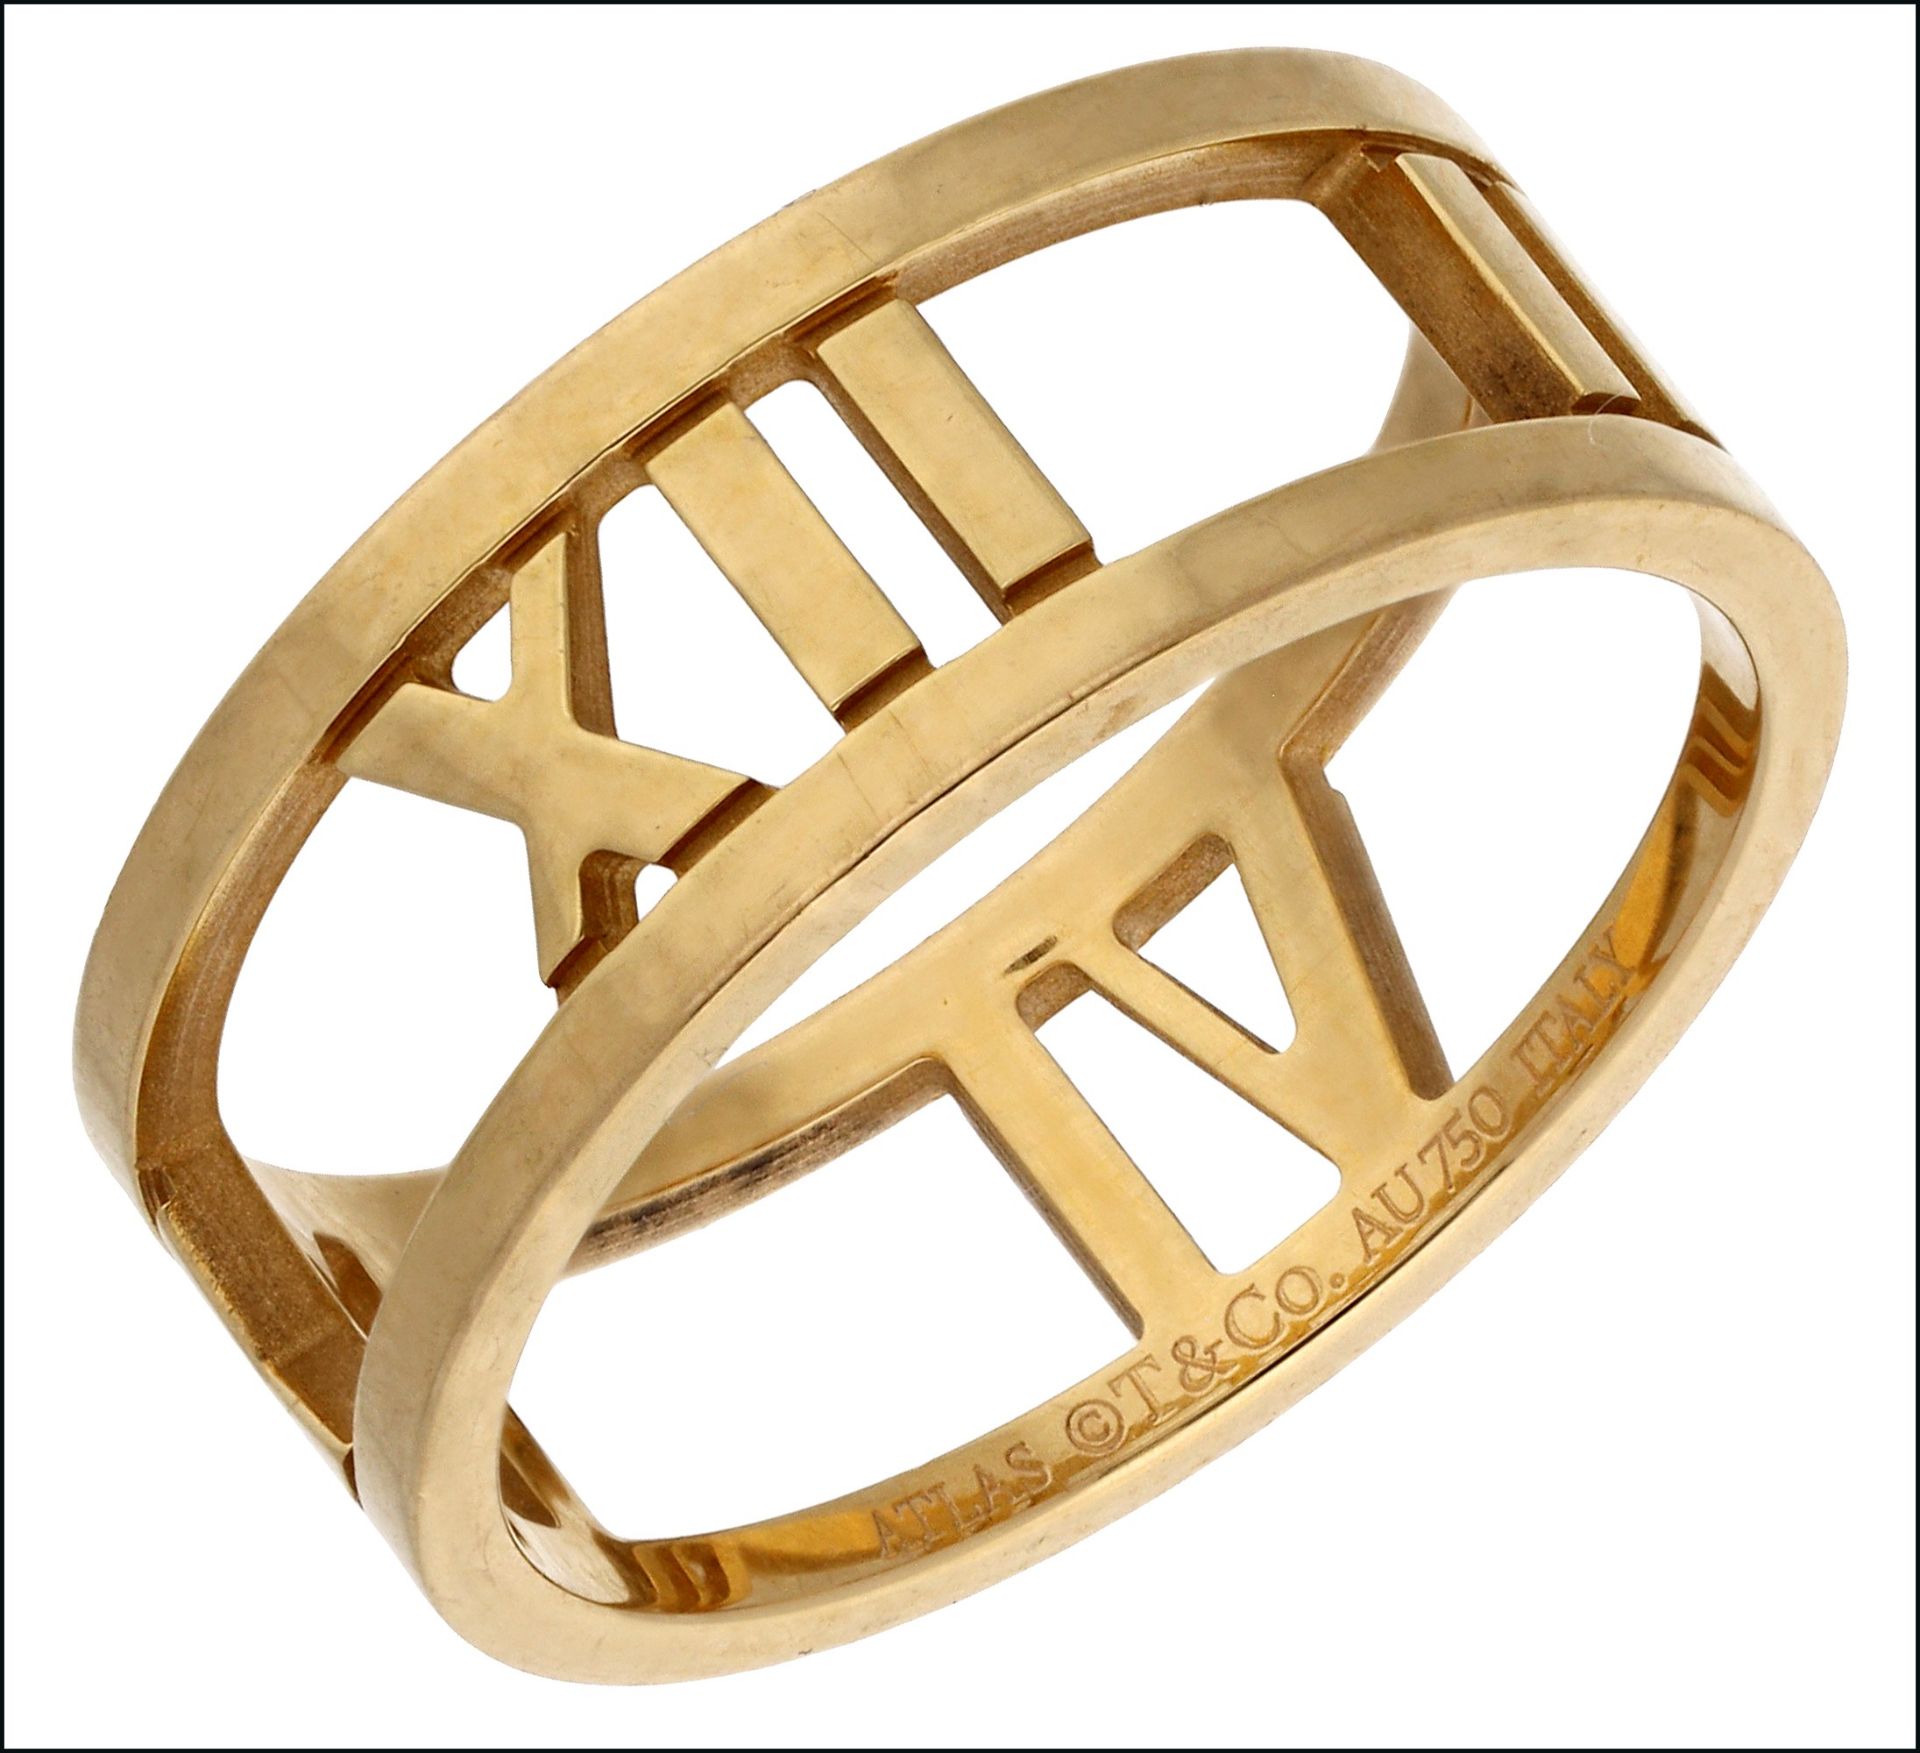 An 'Atlas' ring by Tiffany & Co., the openwork band comprising the Roman numerals 3, 6, 9 an... - Image 2 of 3